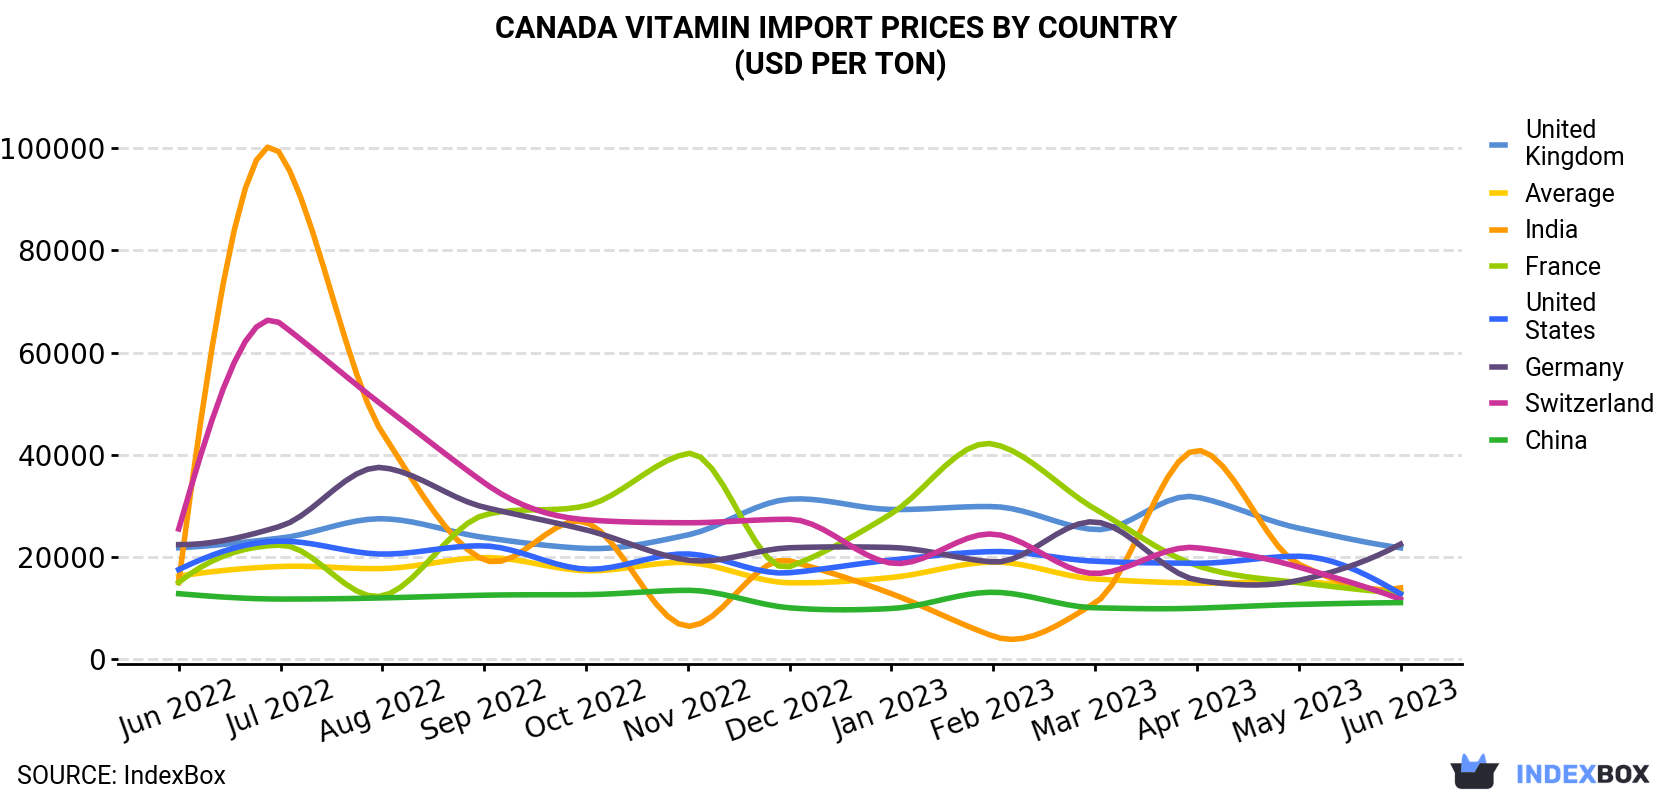 Canada Vitamin Import Prices By Country (USD Per Ton)